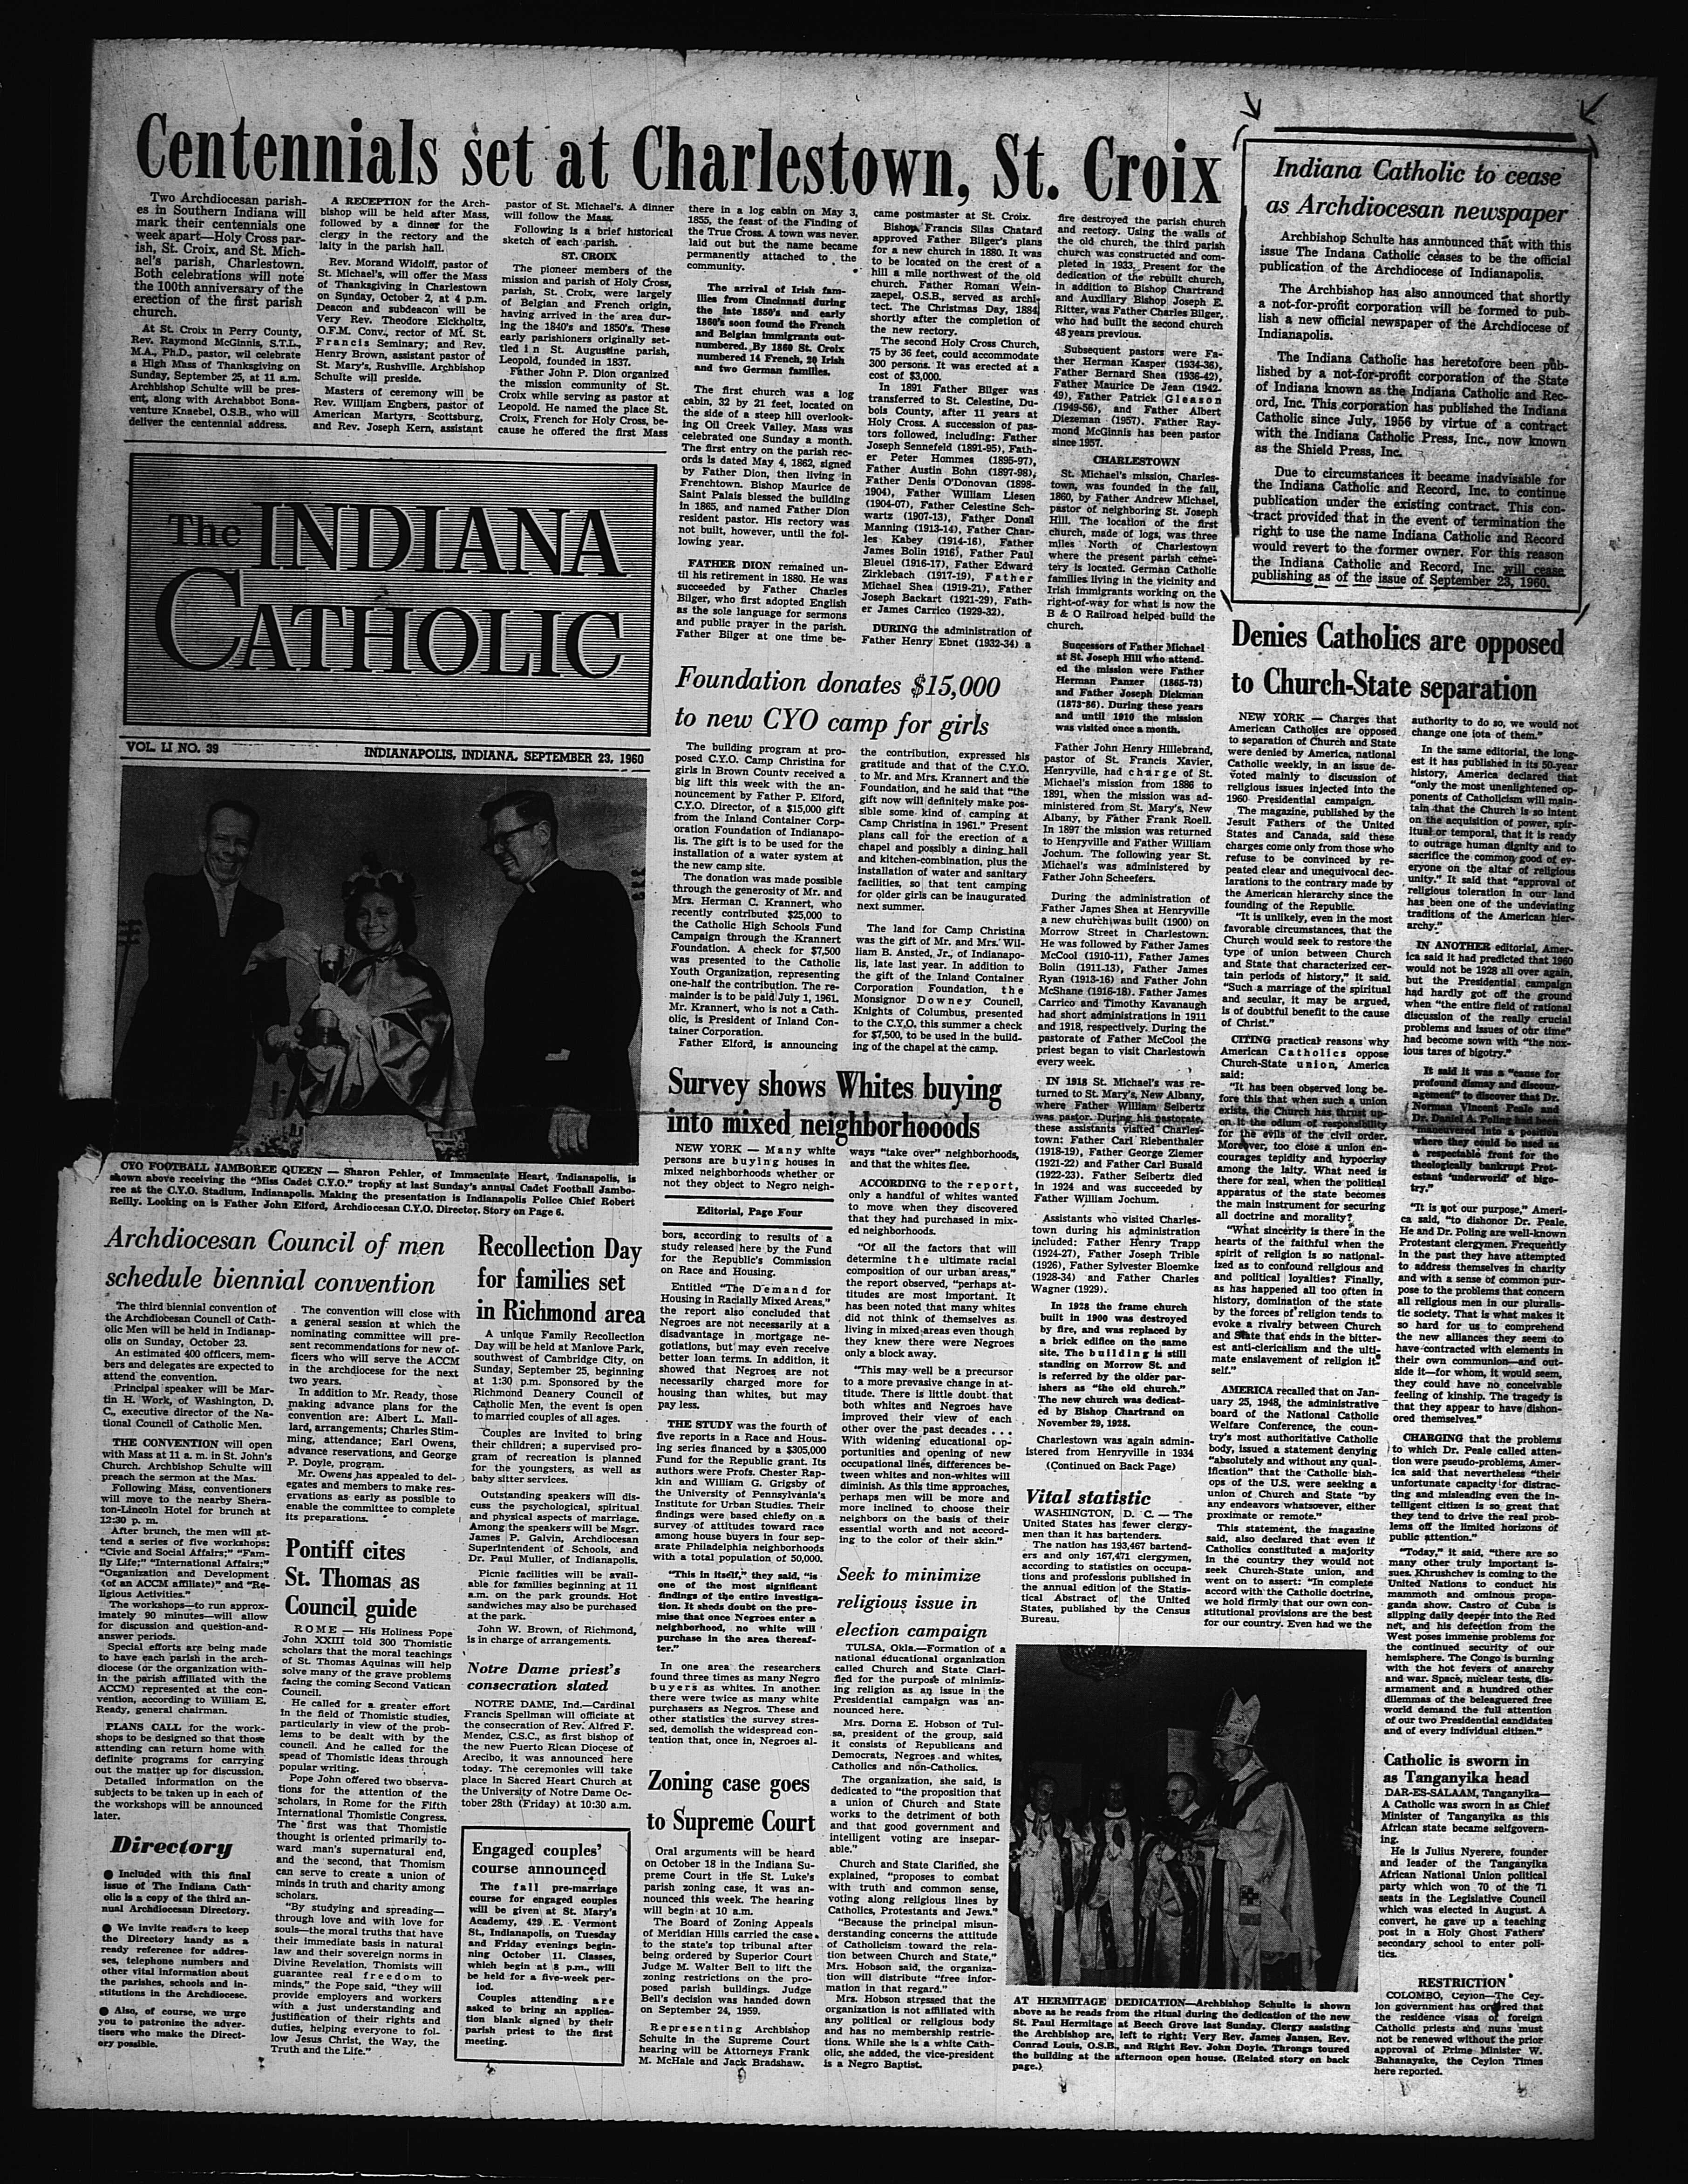 The front page of the last issue of the Indiana Catholic.